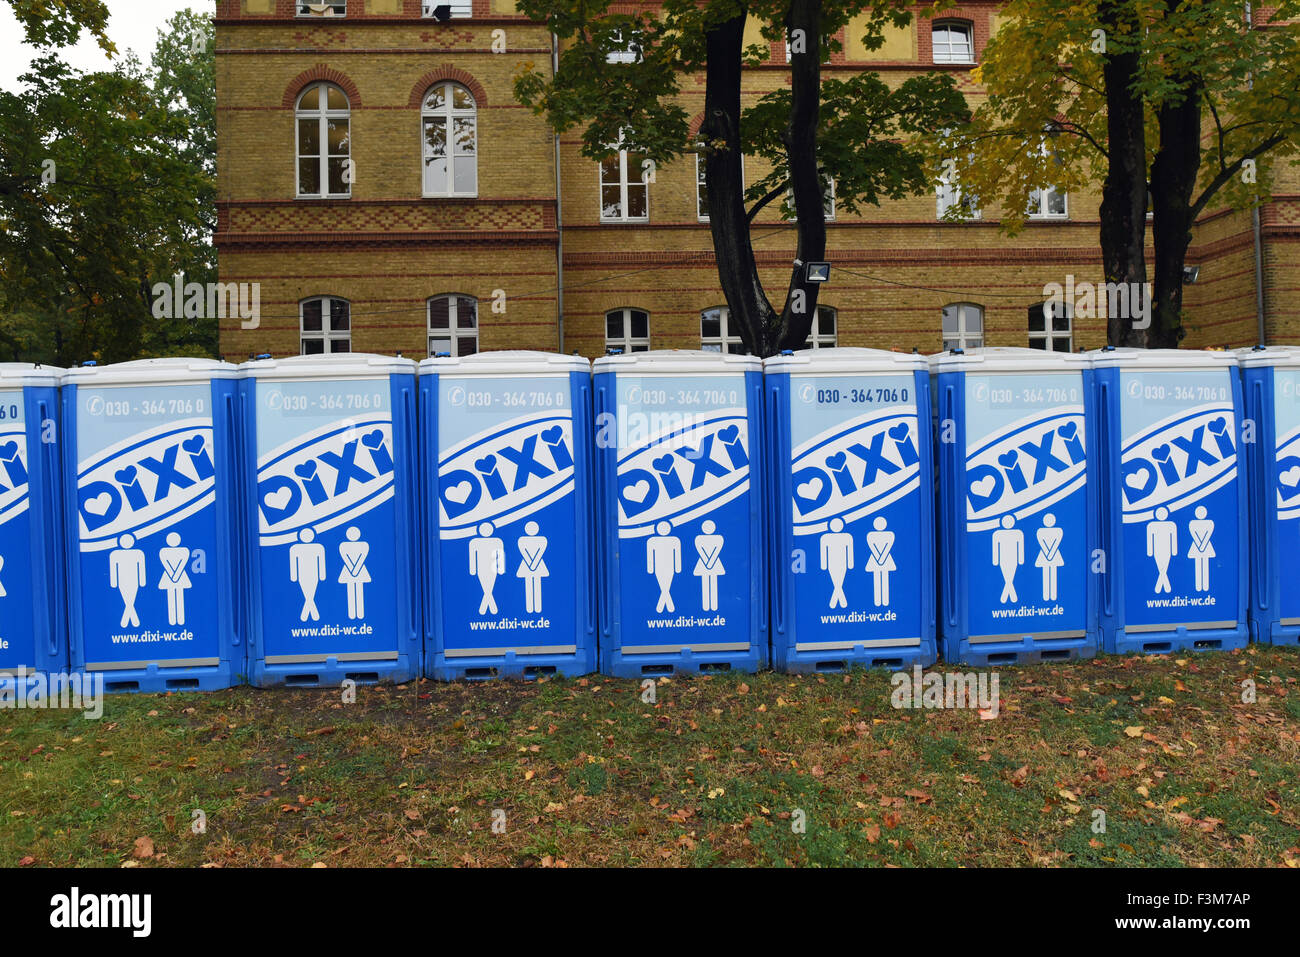 Mobile toilet facilities on the grounds of a refugee processing centre in the public authorities headquaters in Potsdam, Germany, 9 October 2015. The German state of Brandenburg will be accepting more than 40,000 refugees after the orders of the Interior Minister. Photo: RALF HIRSCHBERGER/ZB Stock Photo